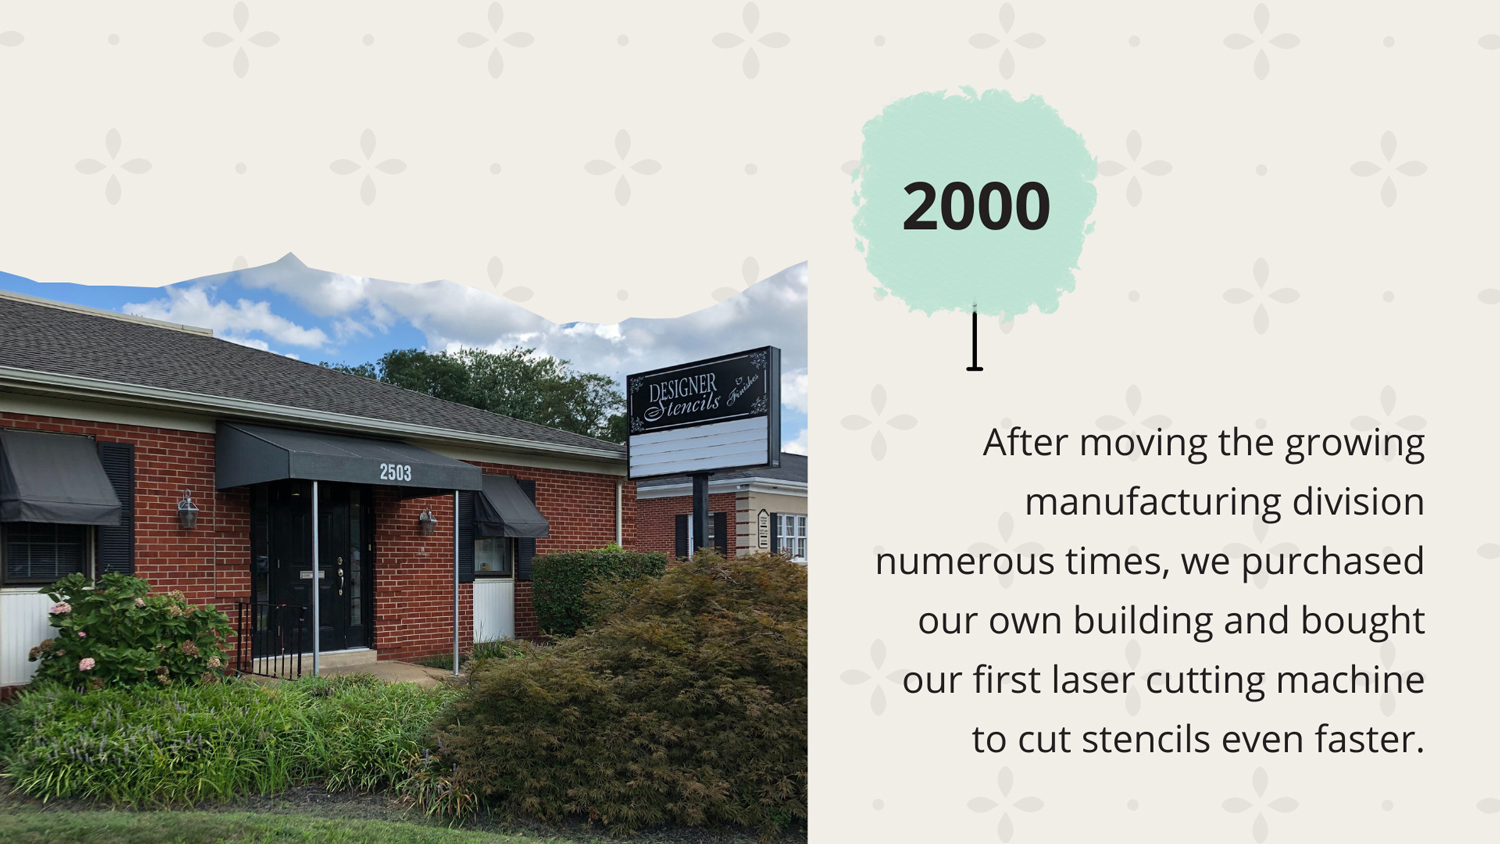 2000 - After moving the growing manufacturing division numerous times, we purchased our own building and bought our first laser cutting machine to cut stencils even faster.